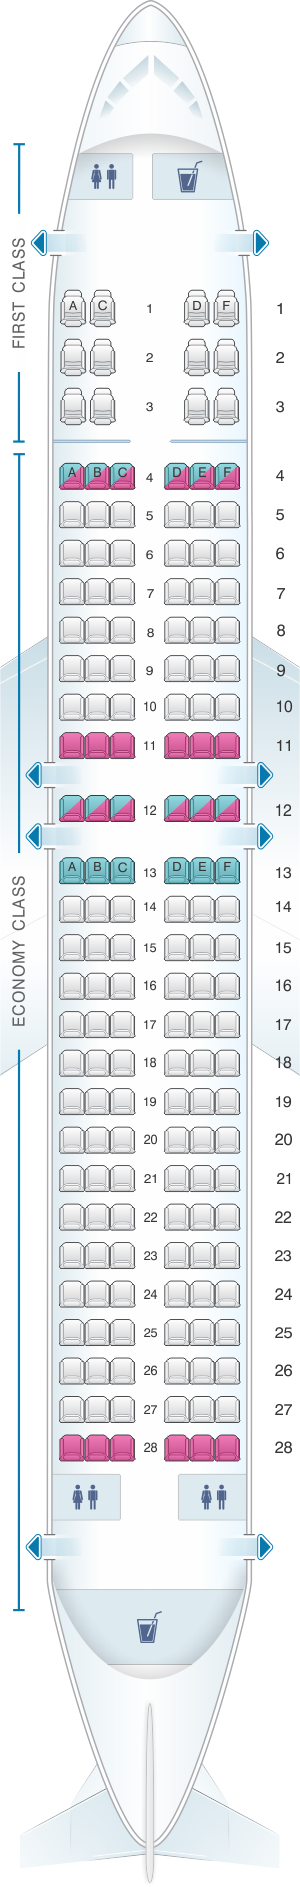 Seat Map And Seating Chart Boeing Sun Country Airlines Fleet My XXX